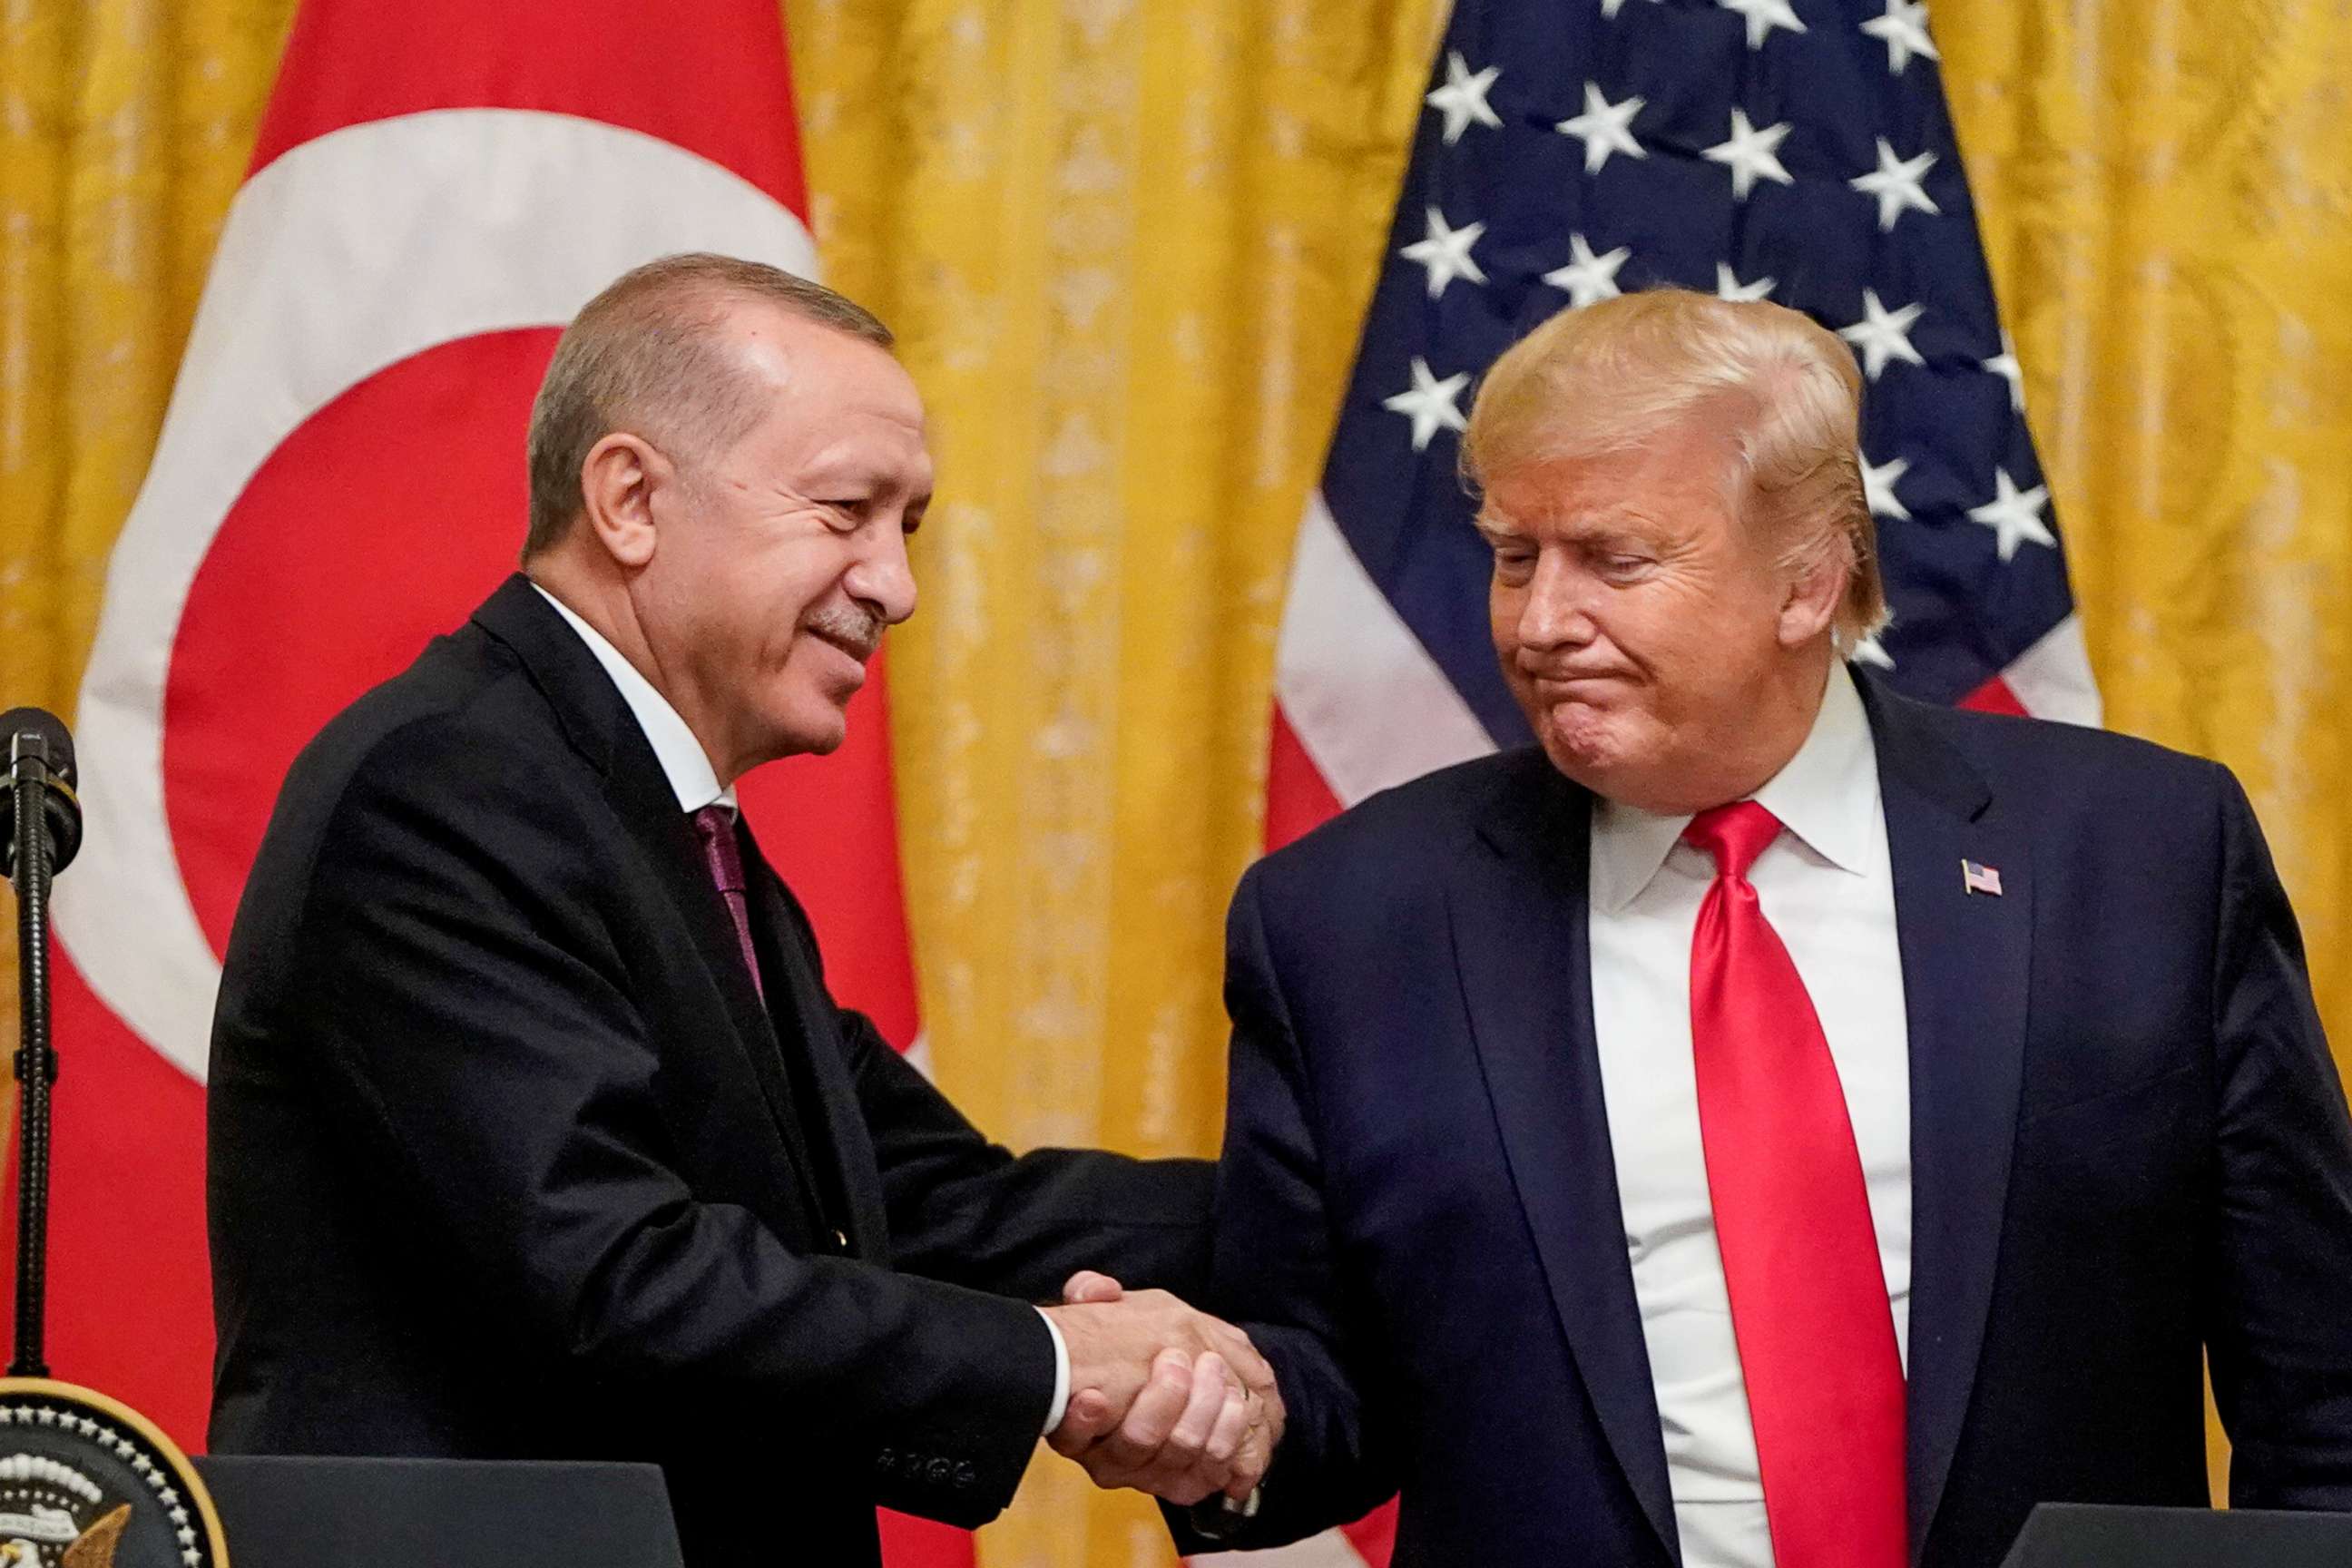 FILE PHOTO: In this Nov. 13, 2019, file photo, President Donald Trump greets Turkey's President Tayyip Erdogan during a joint news conference at the White House in Washington.